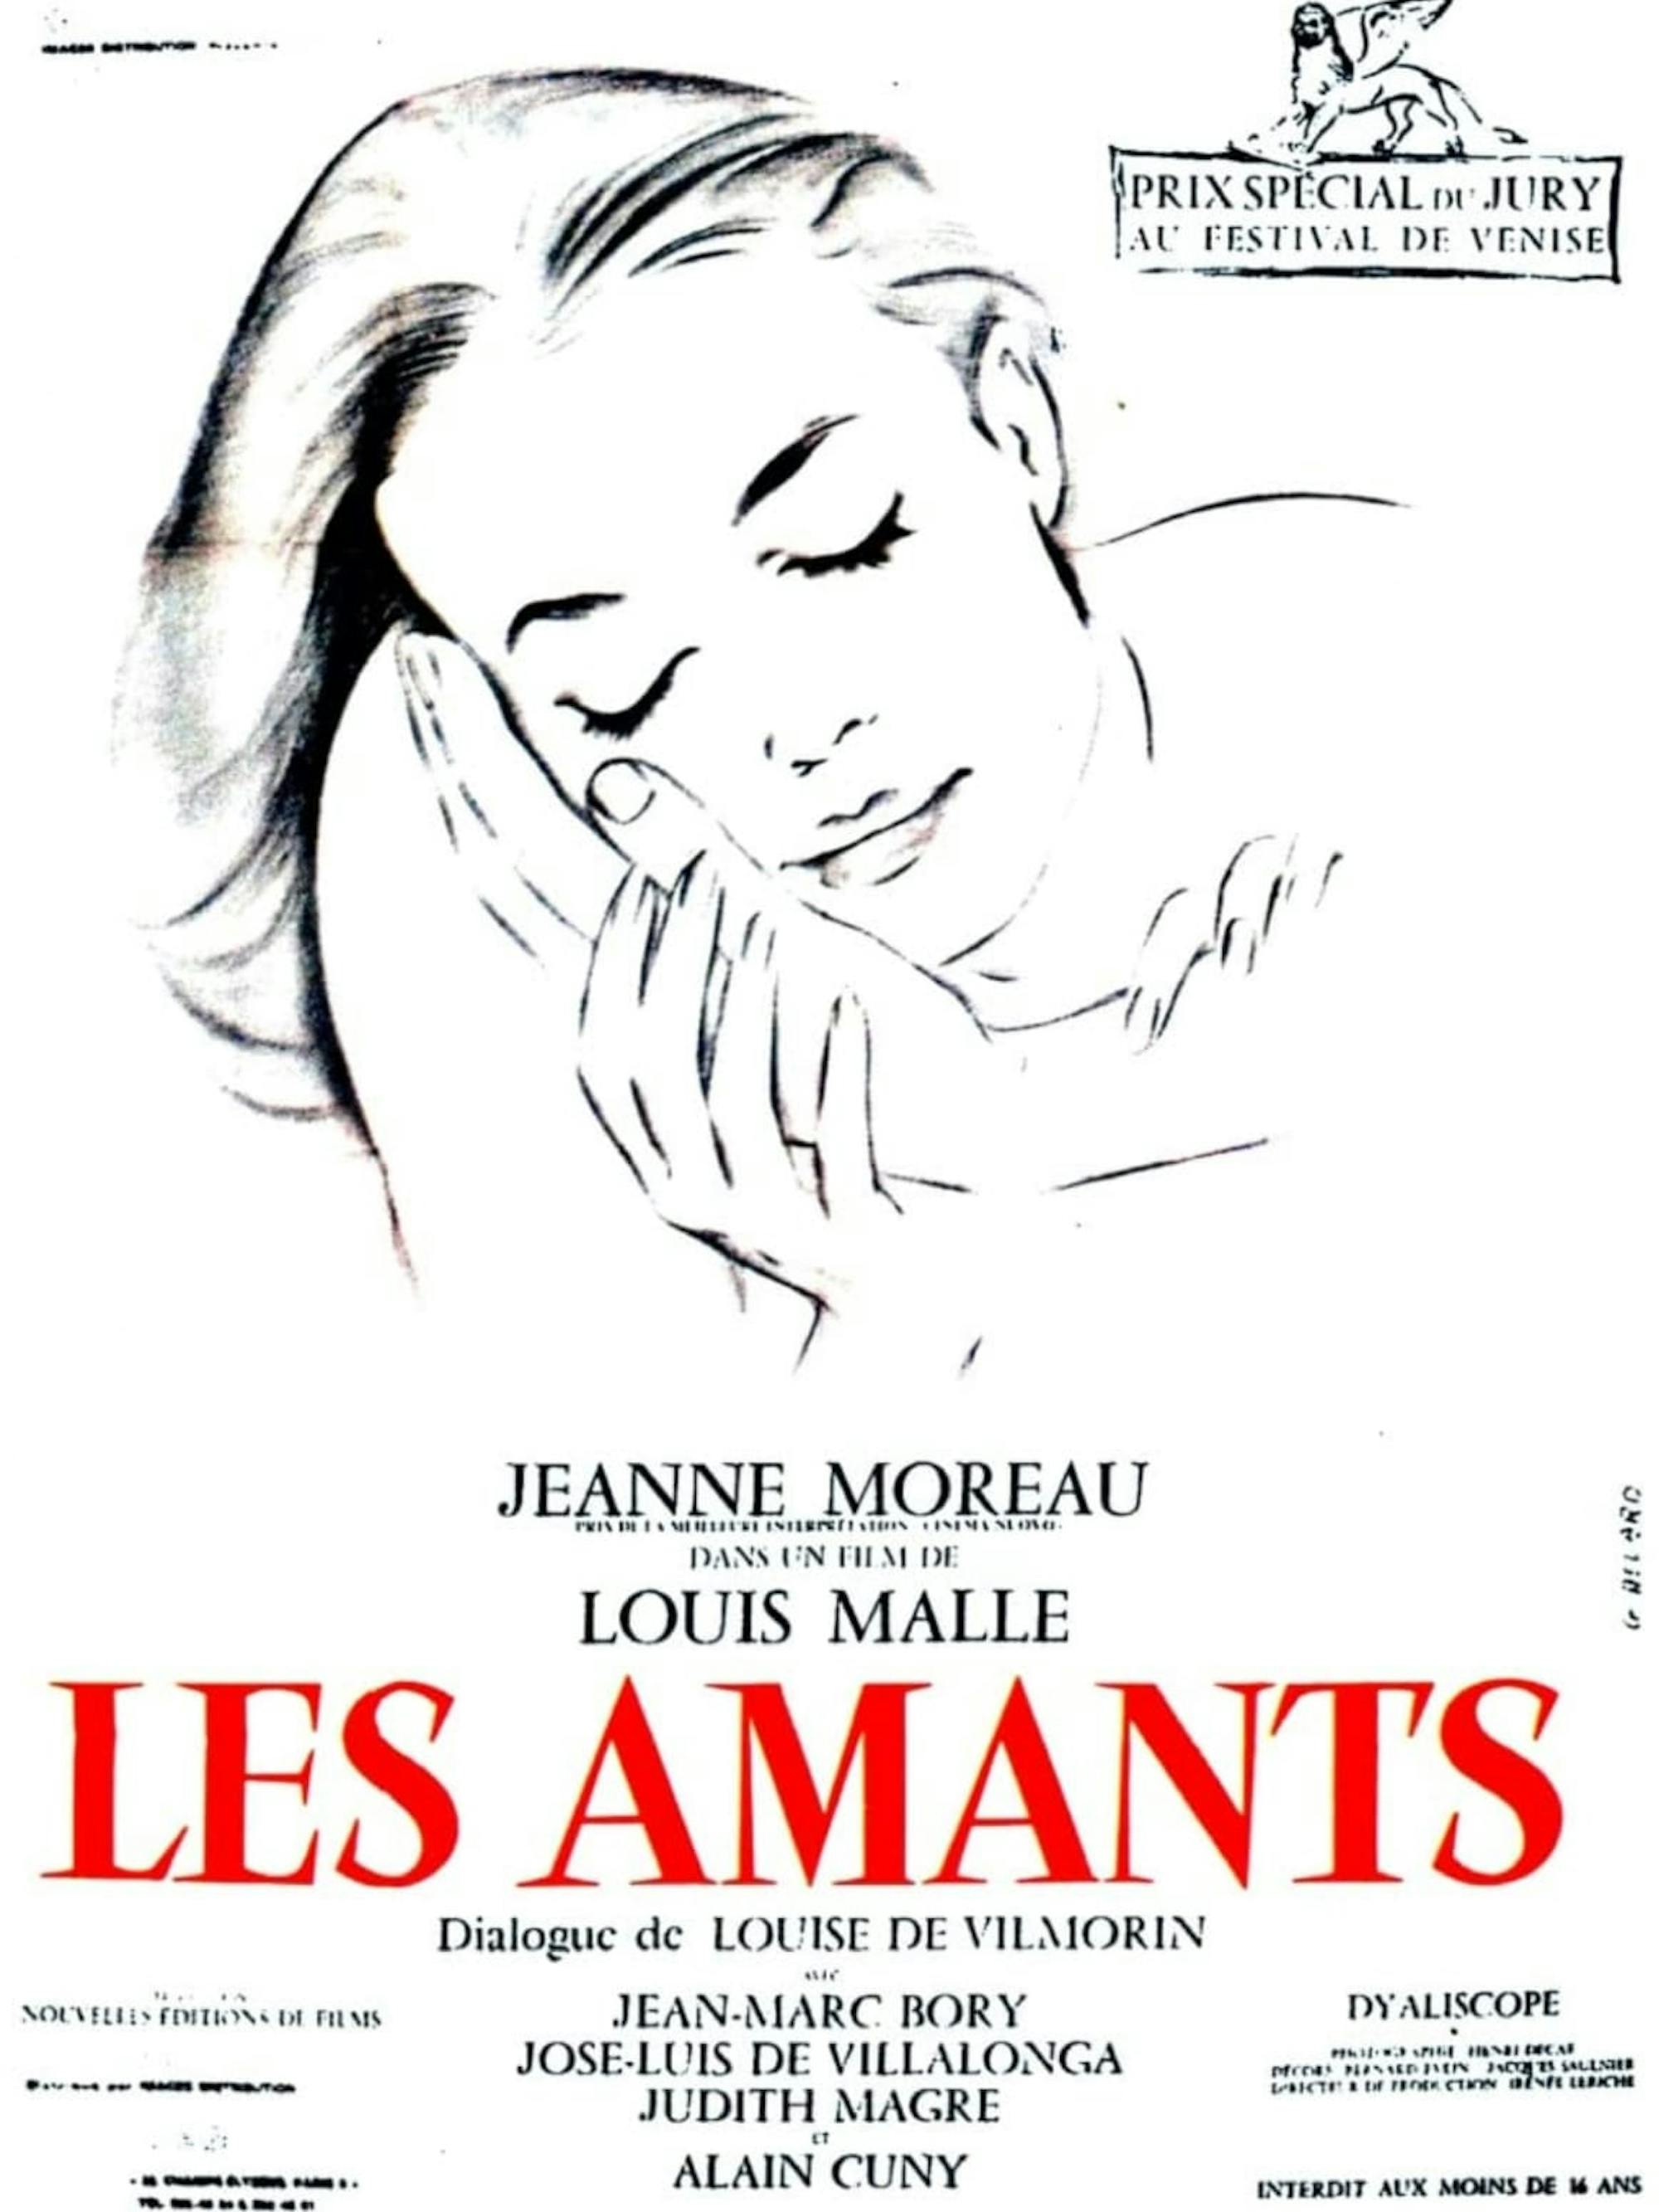 The key art for the movie, Les Amants, which stars Jeanne Moreau and Louis Malle. The poster is white, with a dainty black outline of a woman resting her head in a hand. In the top right corner is a Prix Special de Jury au Festival de Venise.